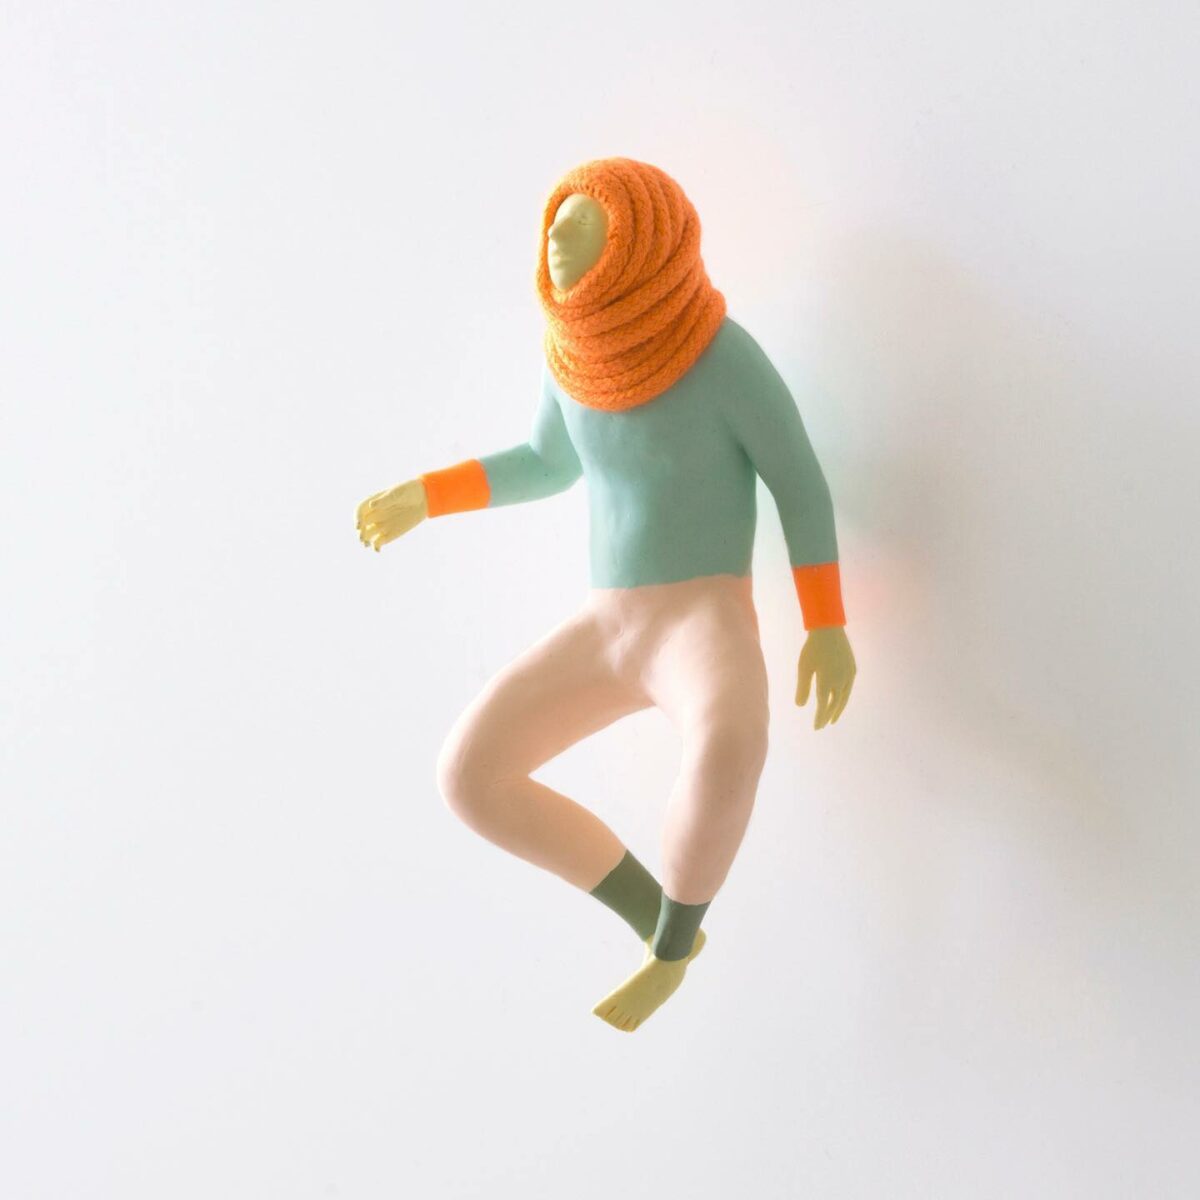 Peculiar Figure Sculptures In Vivid Colors By Frode Bolhuis (4)